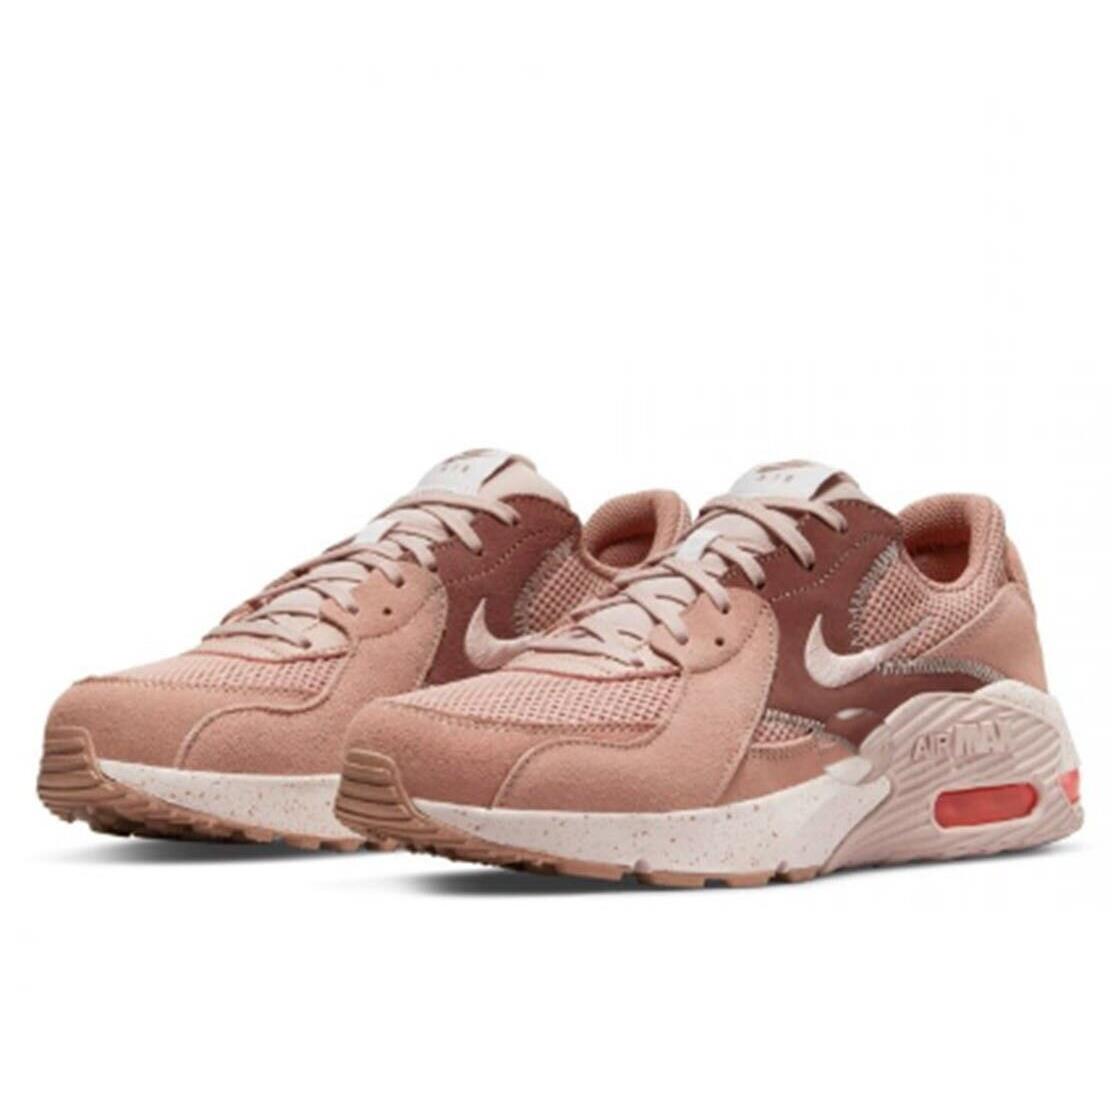 Nike Air Max Excee Sneaker in Rose Whisper Women US Size: 6.5 - Pink